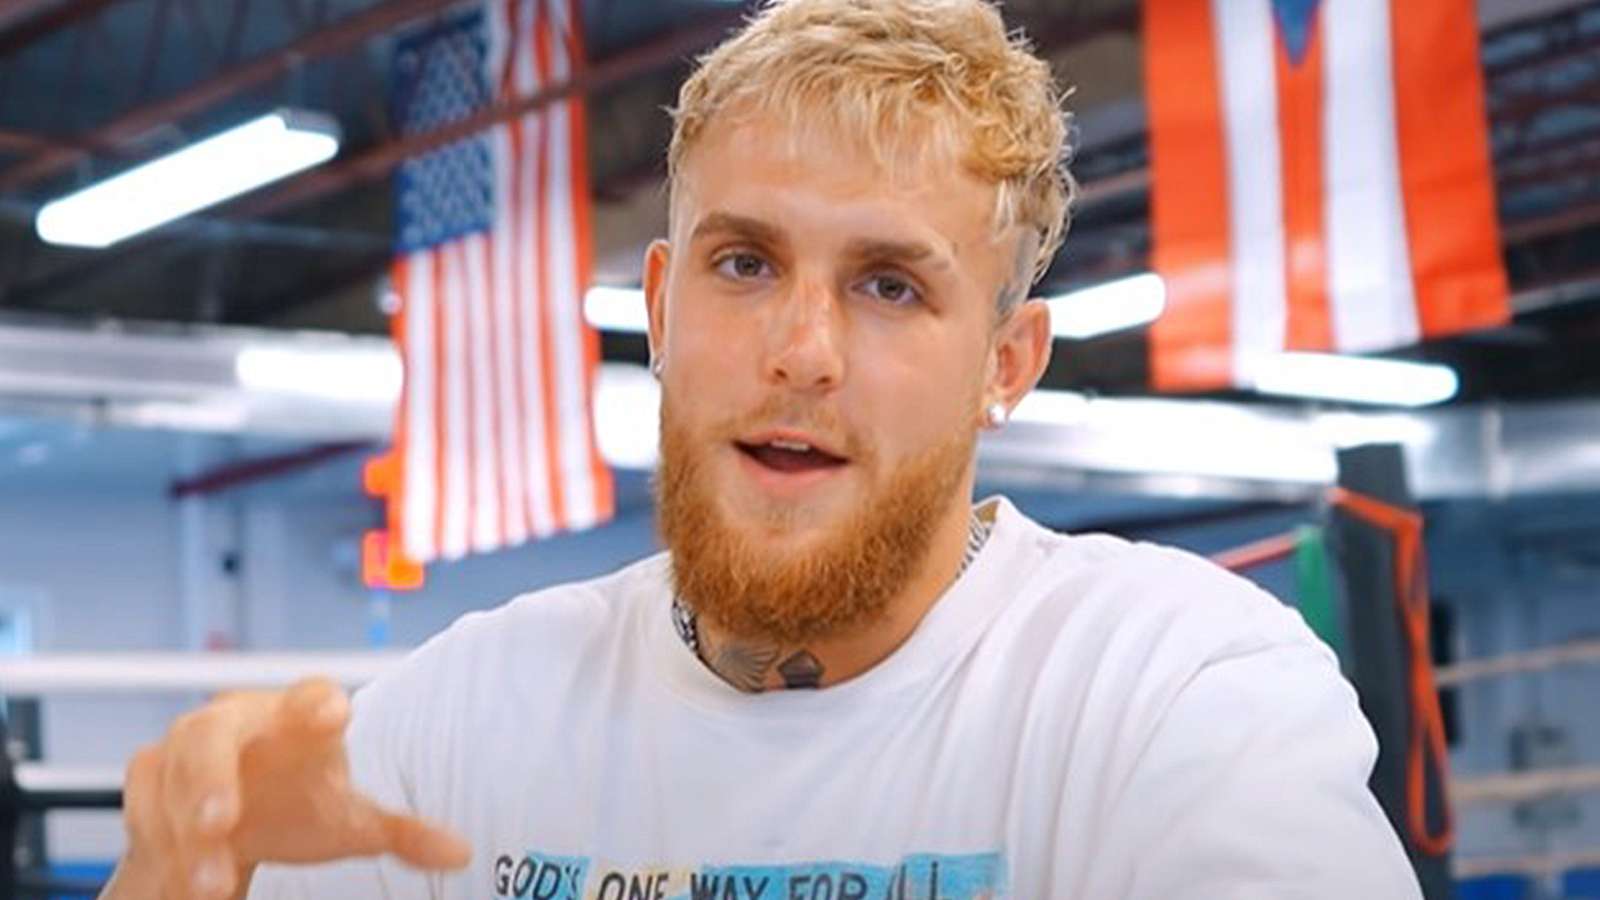 jake paul blasts claims of mike tyson walking out on sparring session